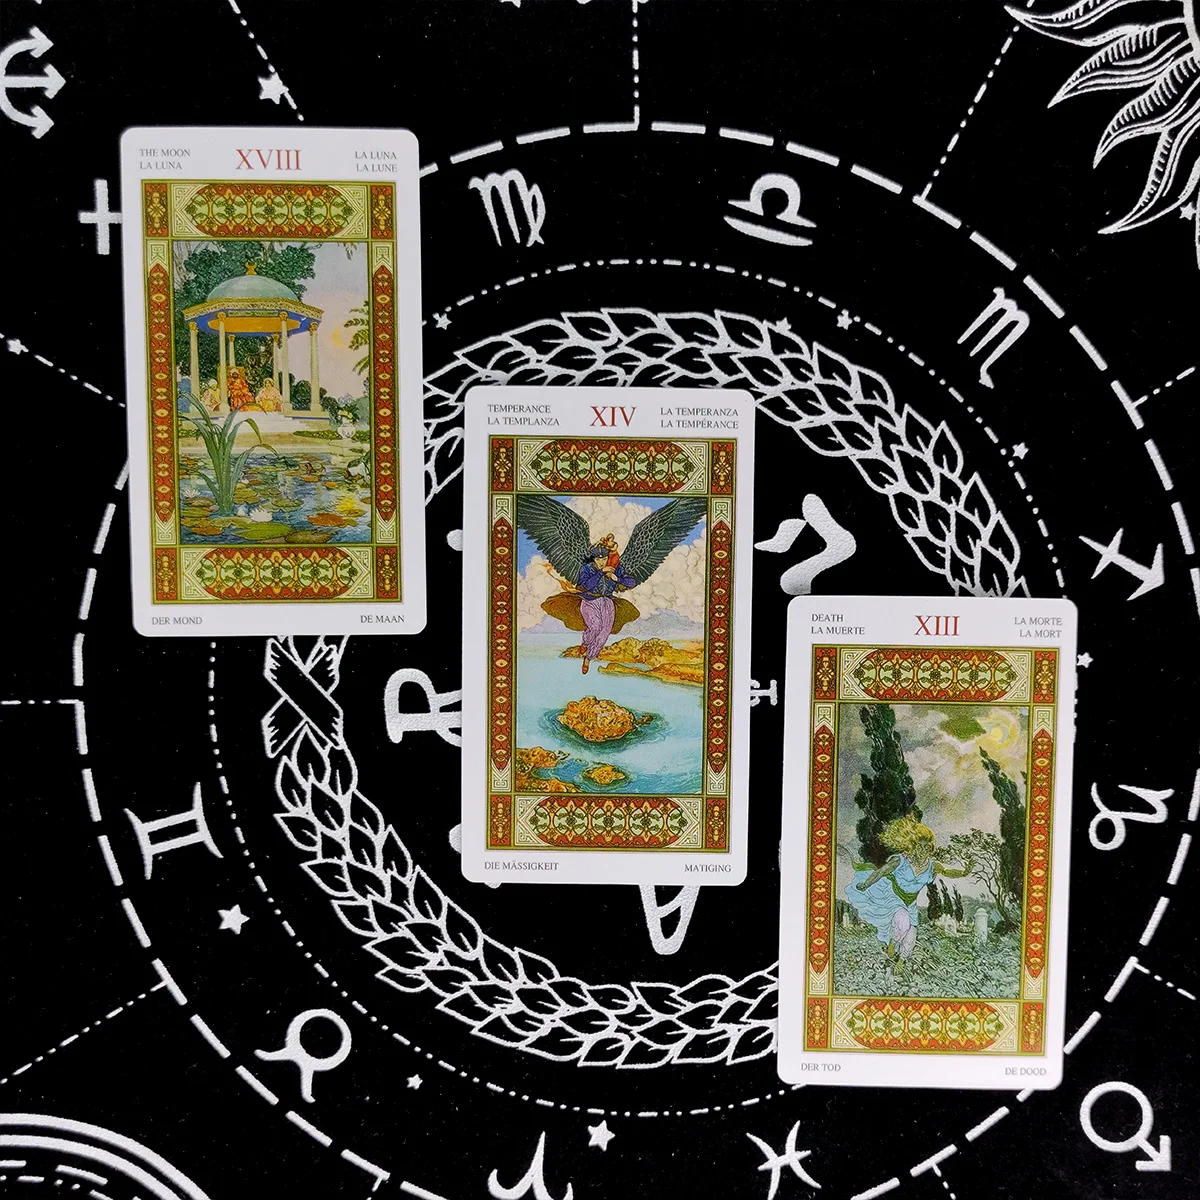 Tarot of the Thousand and one Nights.